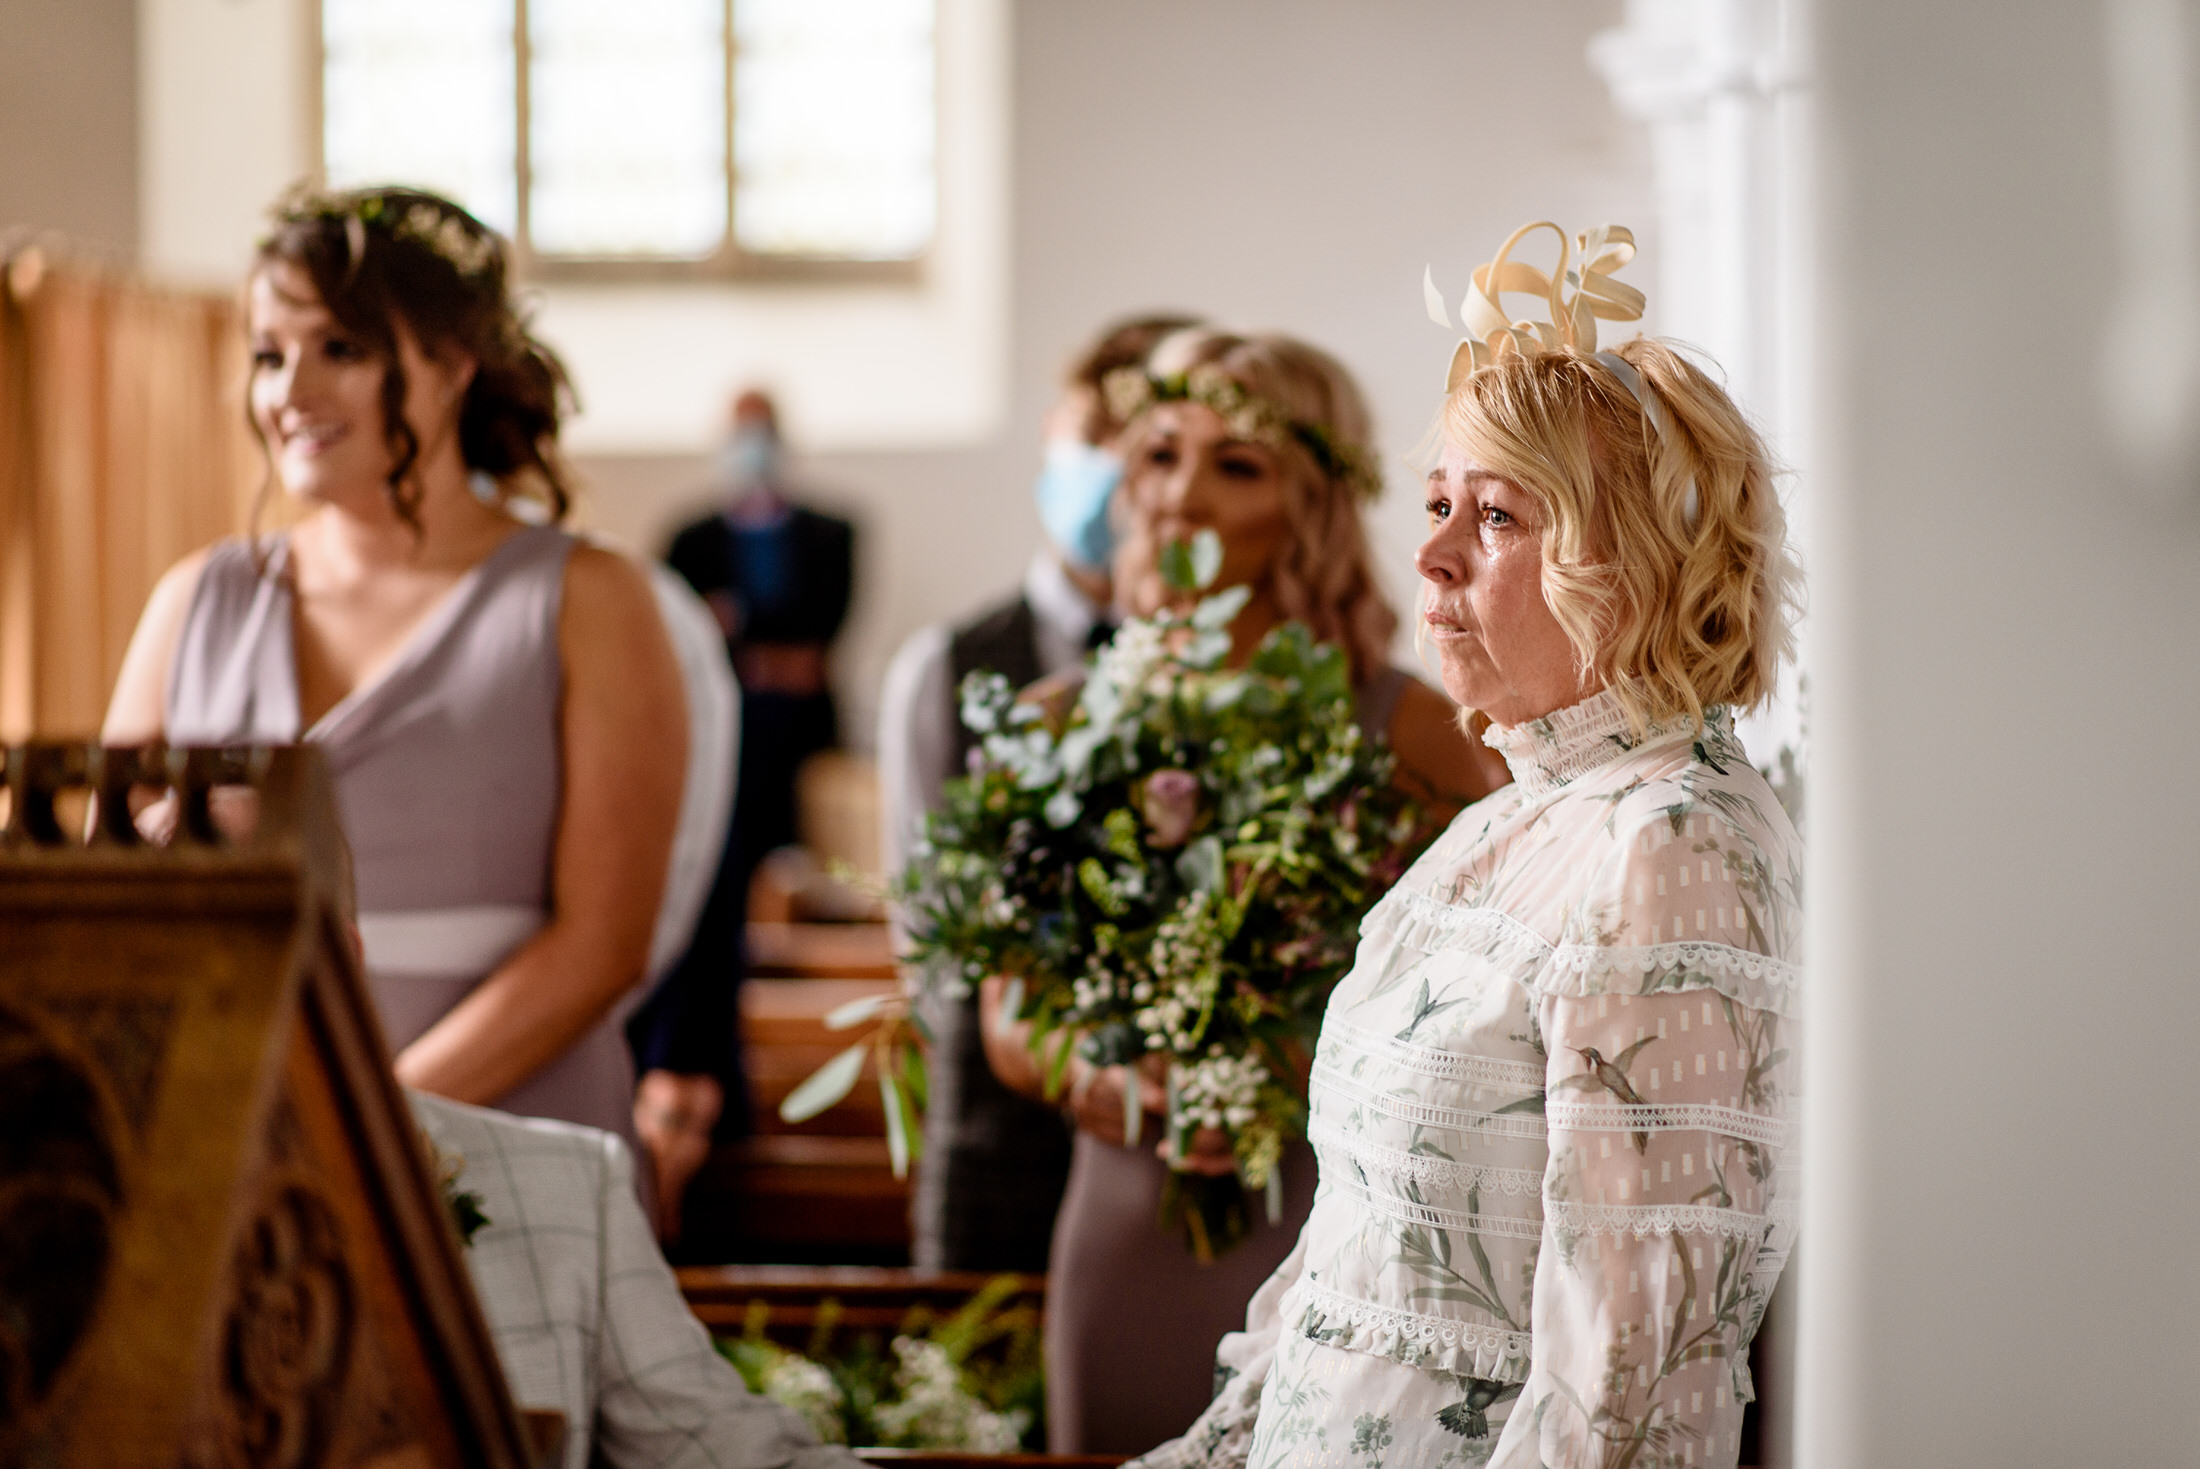 At a wedding in Scrivelsby Walled Garden, a bride and groom share an intimate moment as they gaze lovingly into each other's eyes inside the church.